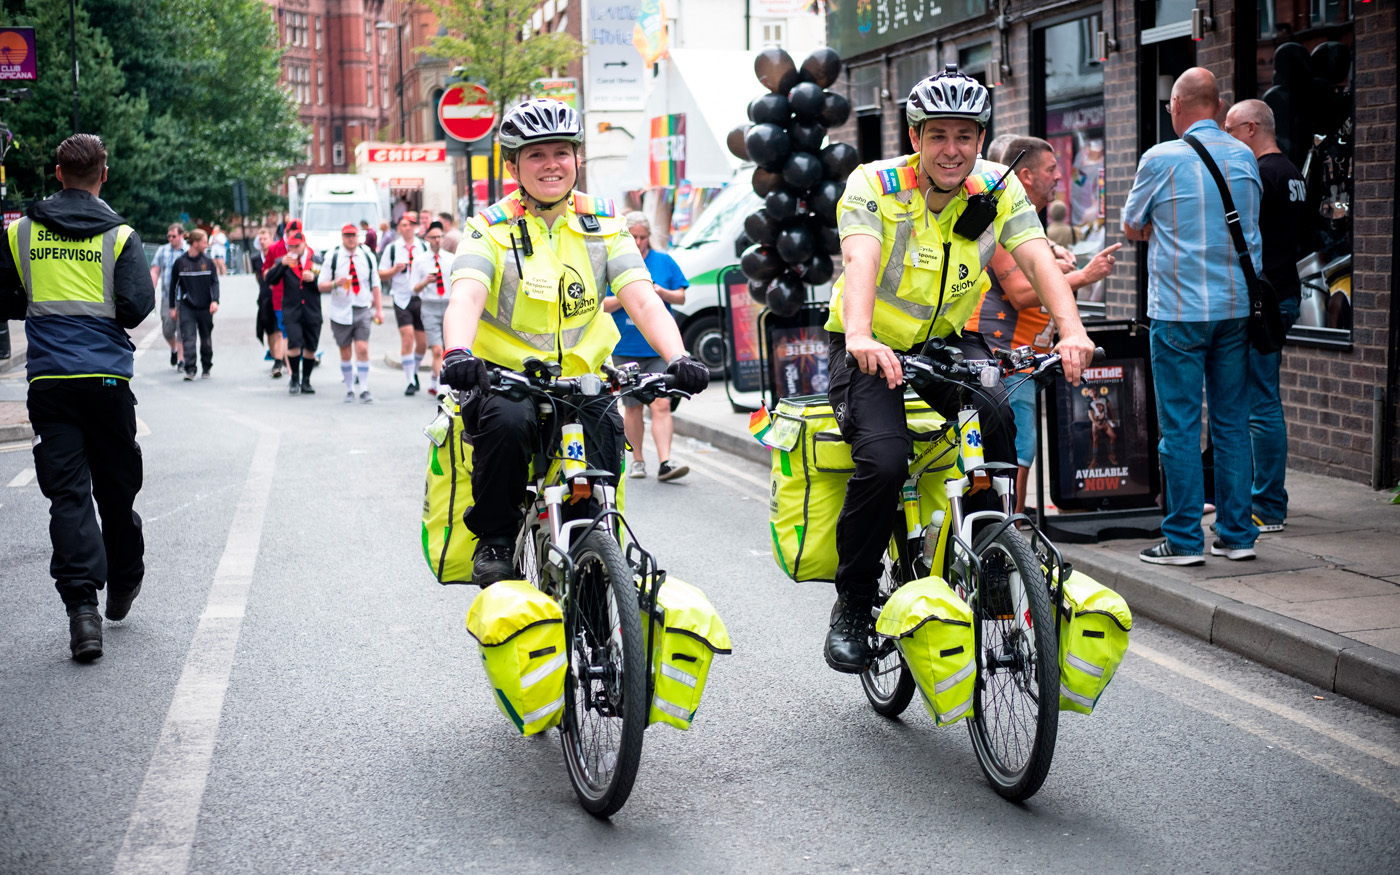 two-emergency-cycle-responders-cycling-down-street-during-festival-large-pod.jpg